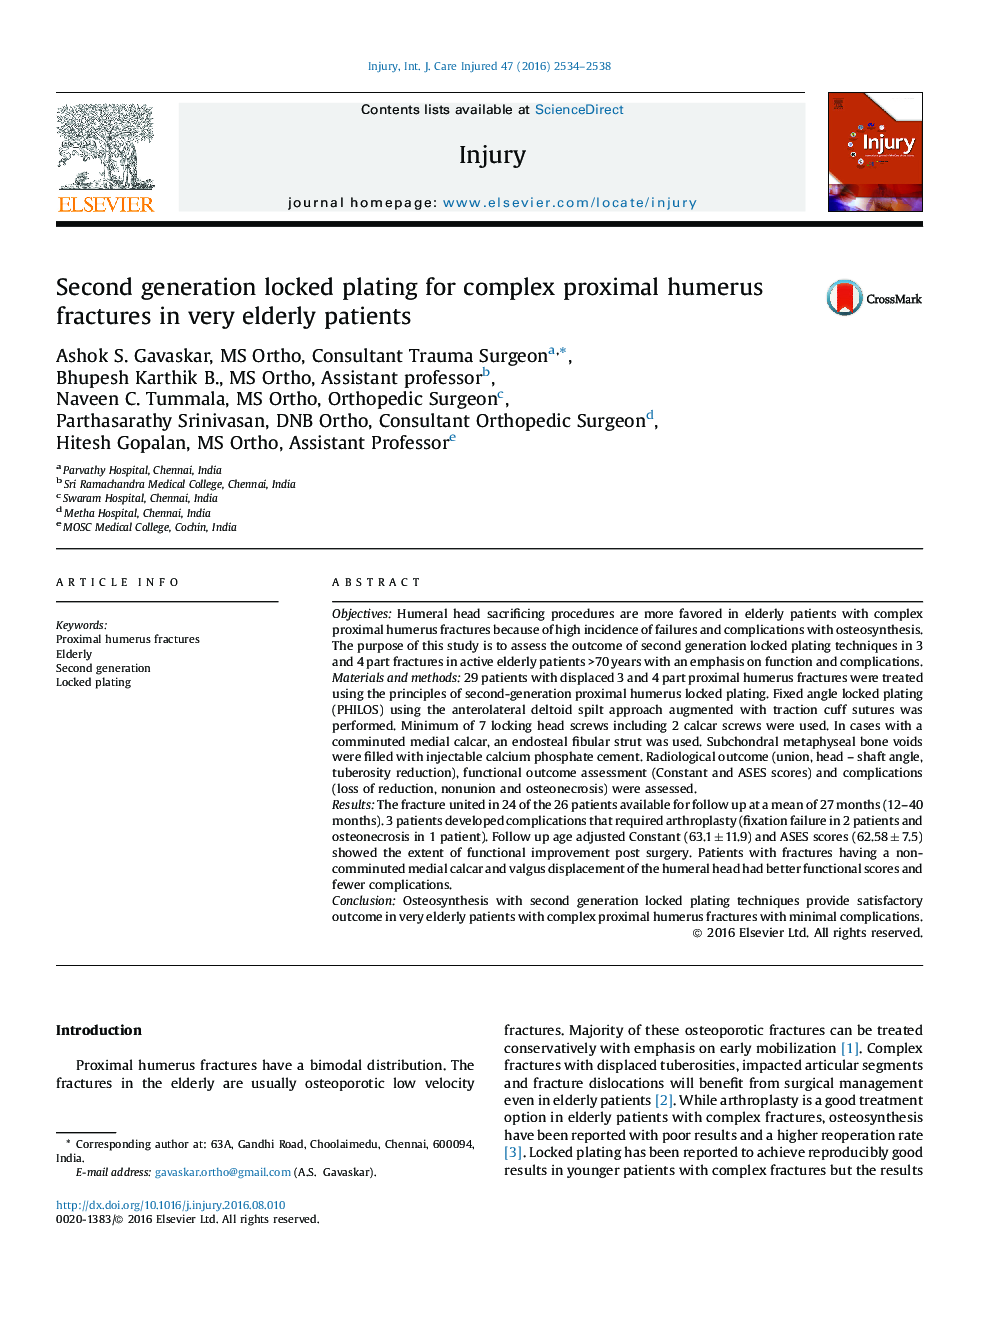 Second generation locked plating for complex proximal humerus fractures in very elderly patients